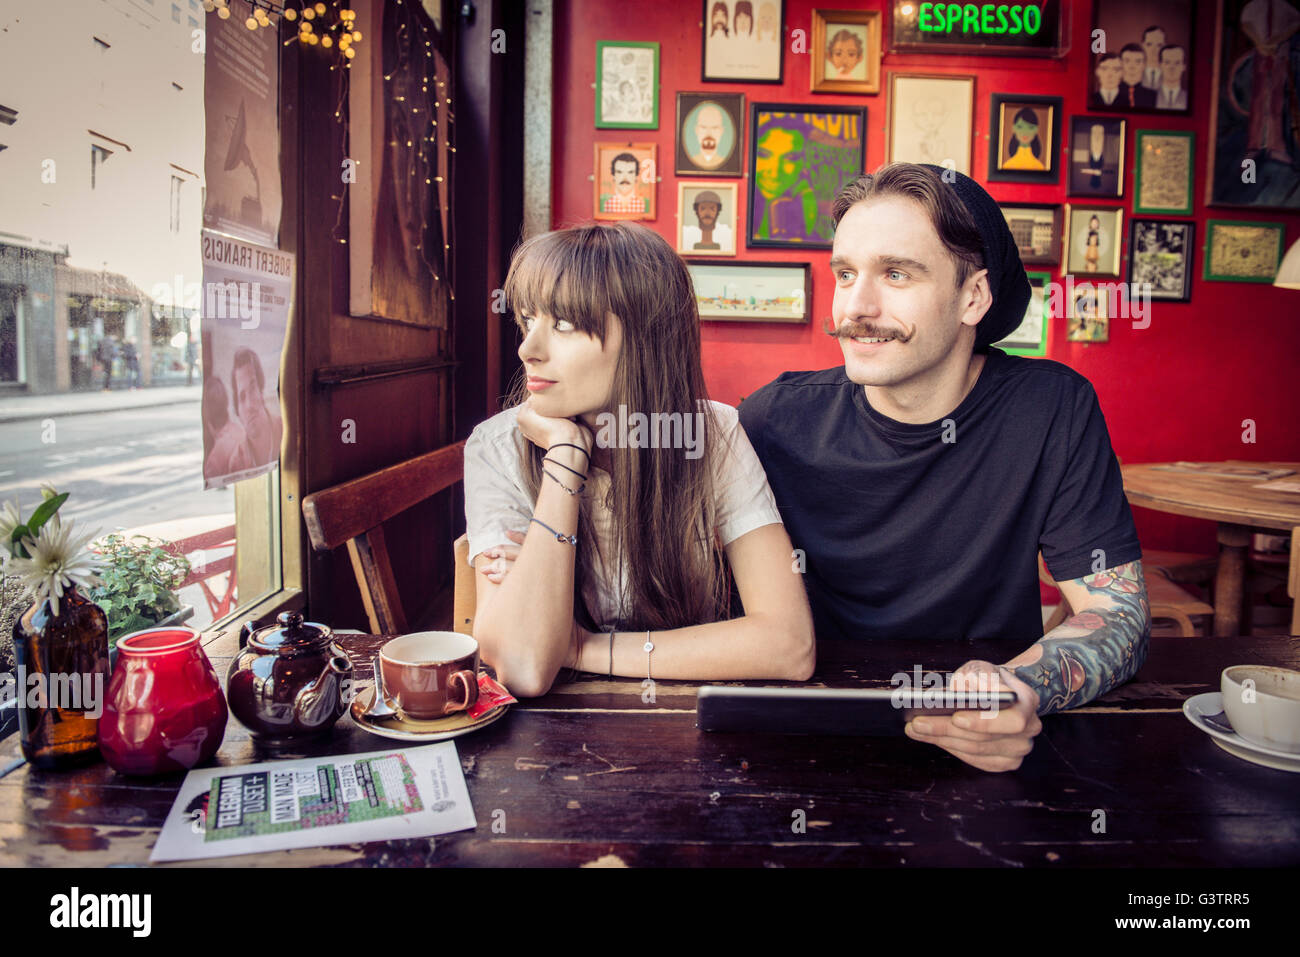 A young couple enjoying being with each other in a coffee shop in Manchester. Stock Photo